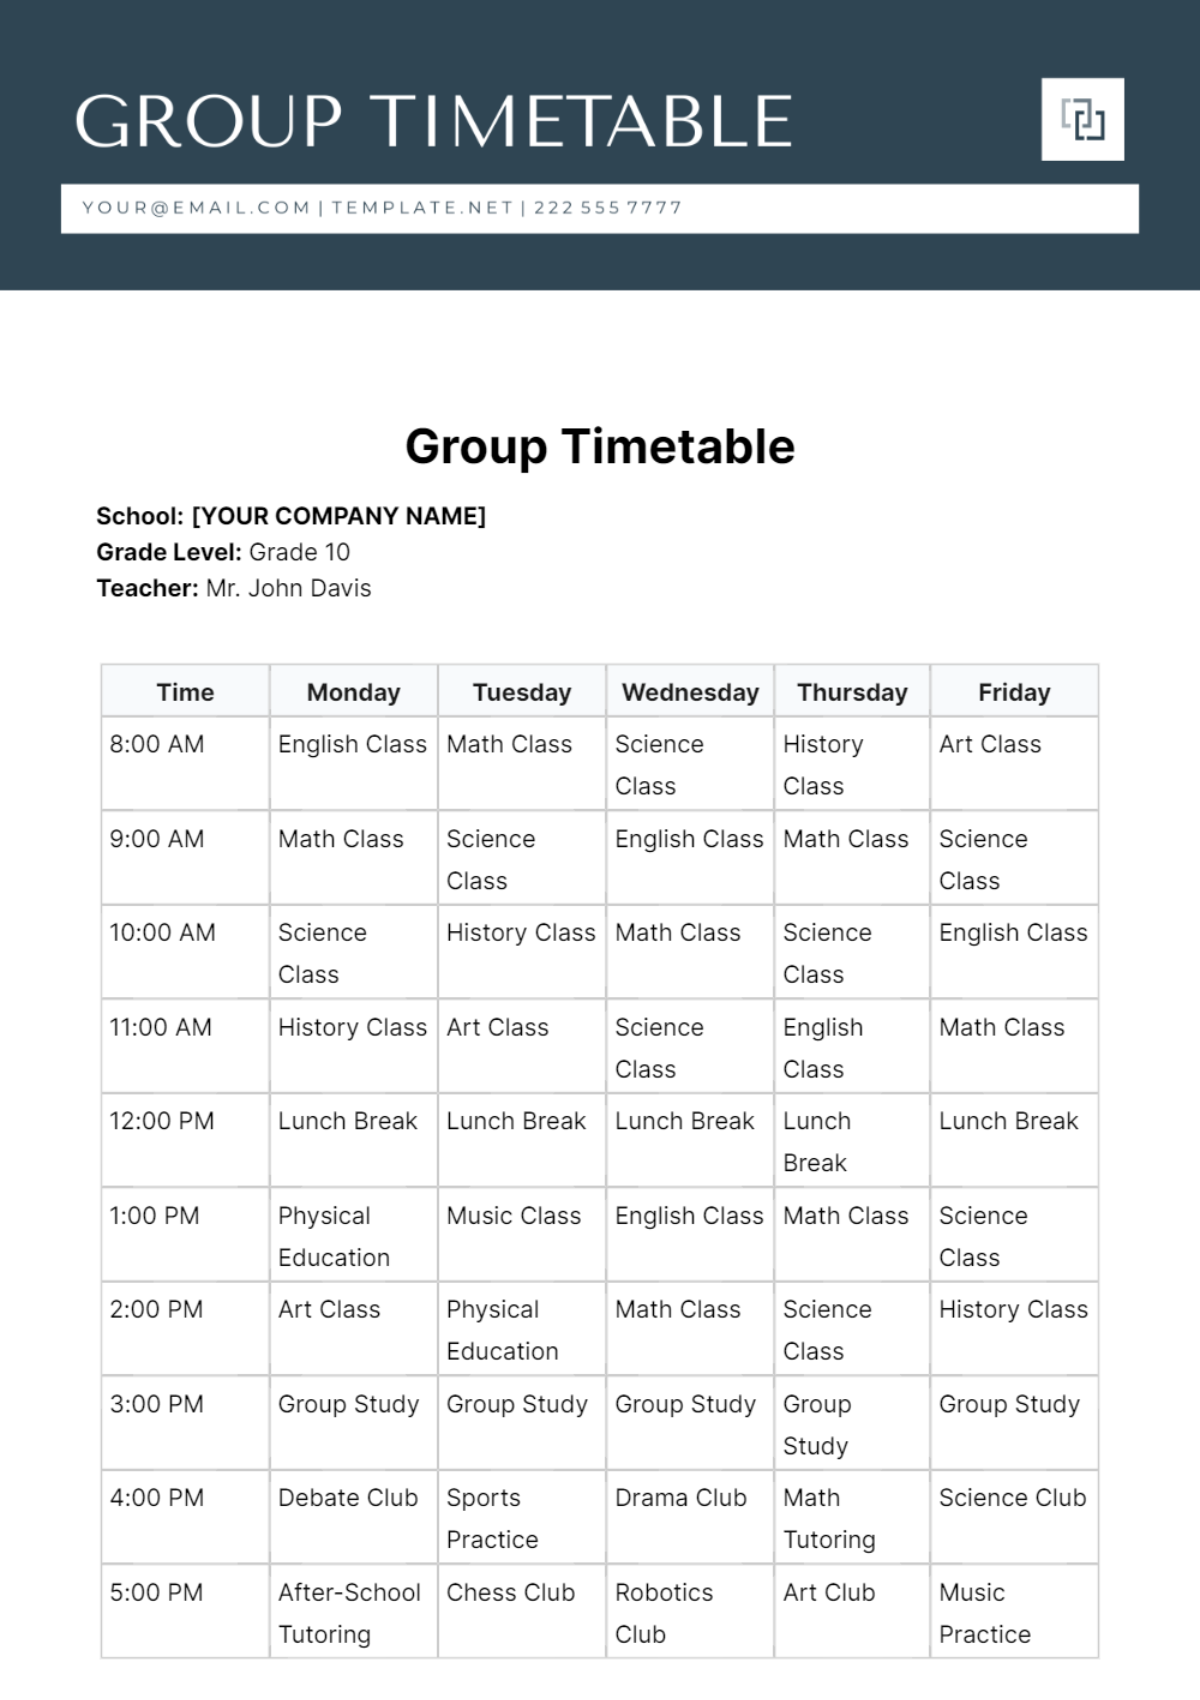 Group Timetable Template